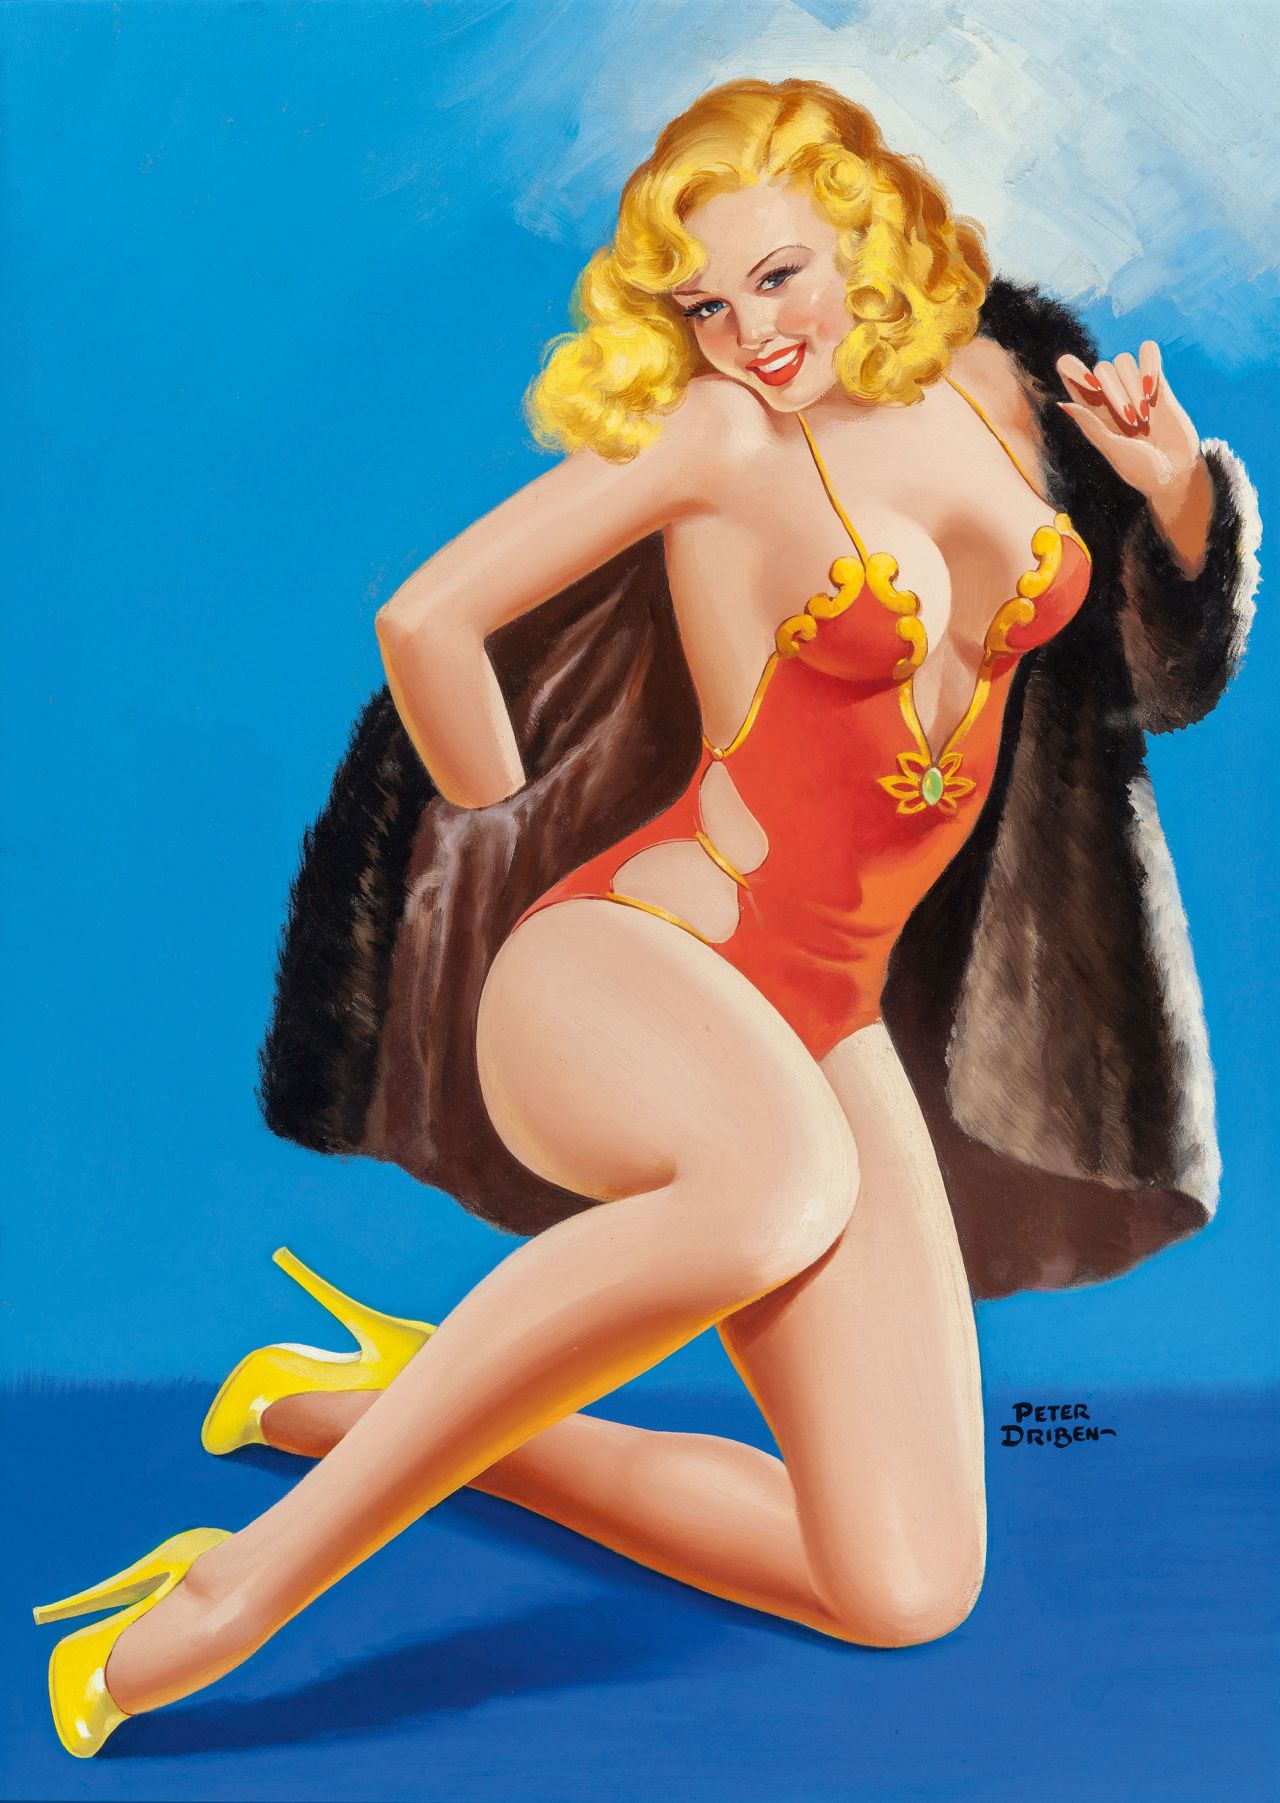 Burlesque Pin Up Girl Porn - The lost art of the American pin-up | CNN